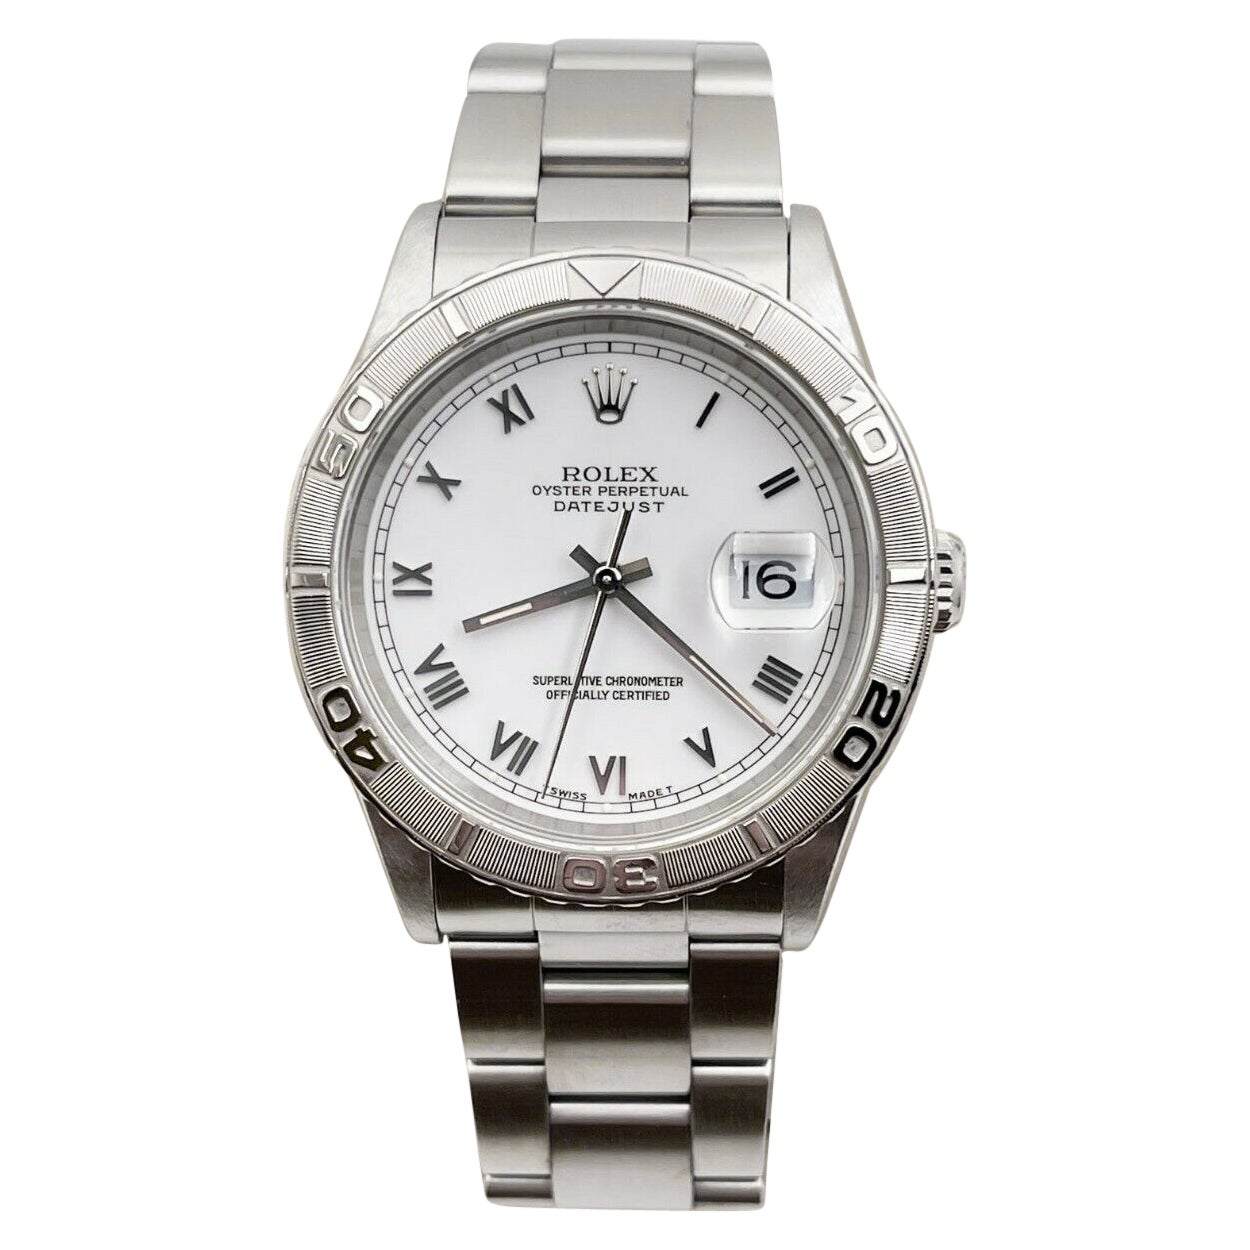 Rolex 16264 Datejust White Dial Thunderbird Stainless Steel For Sale